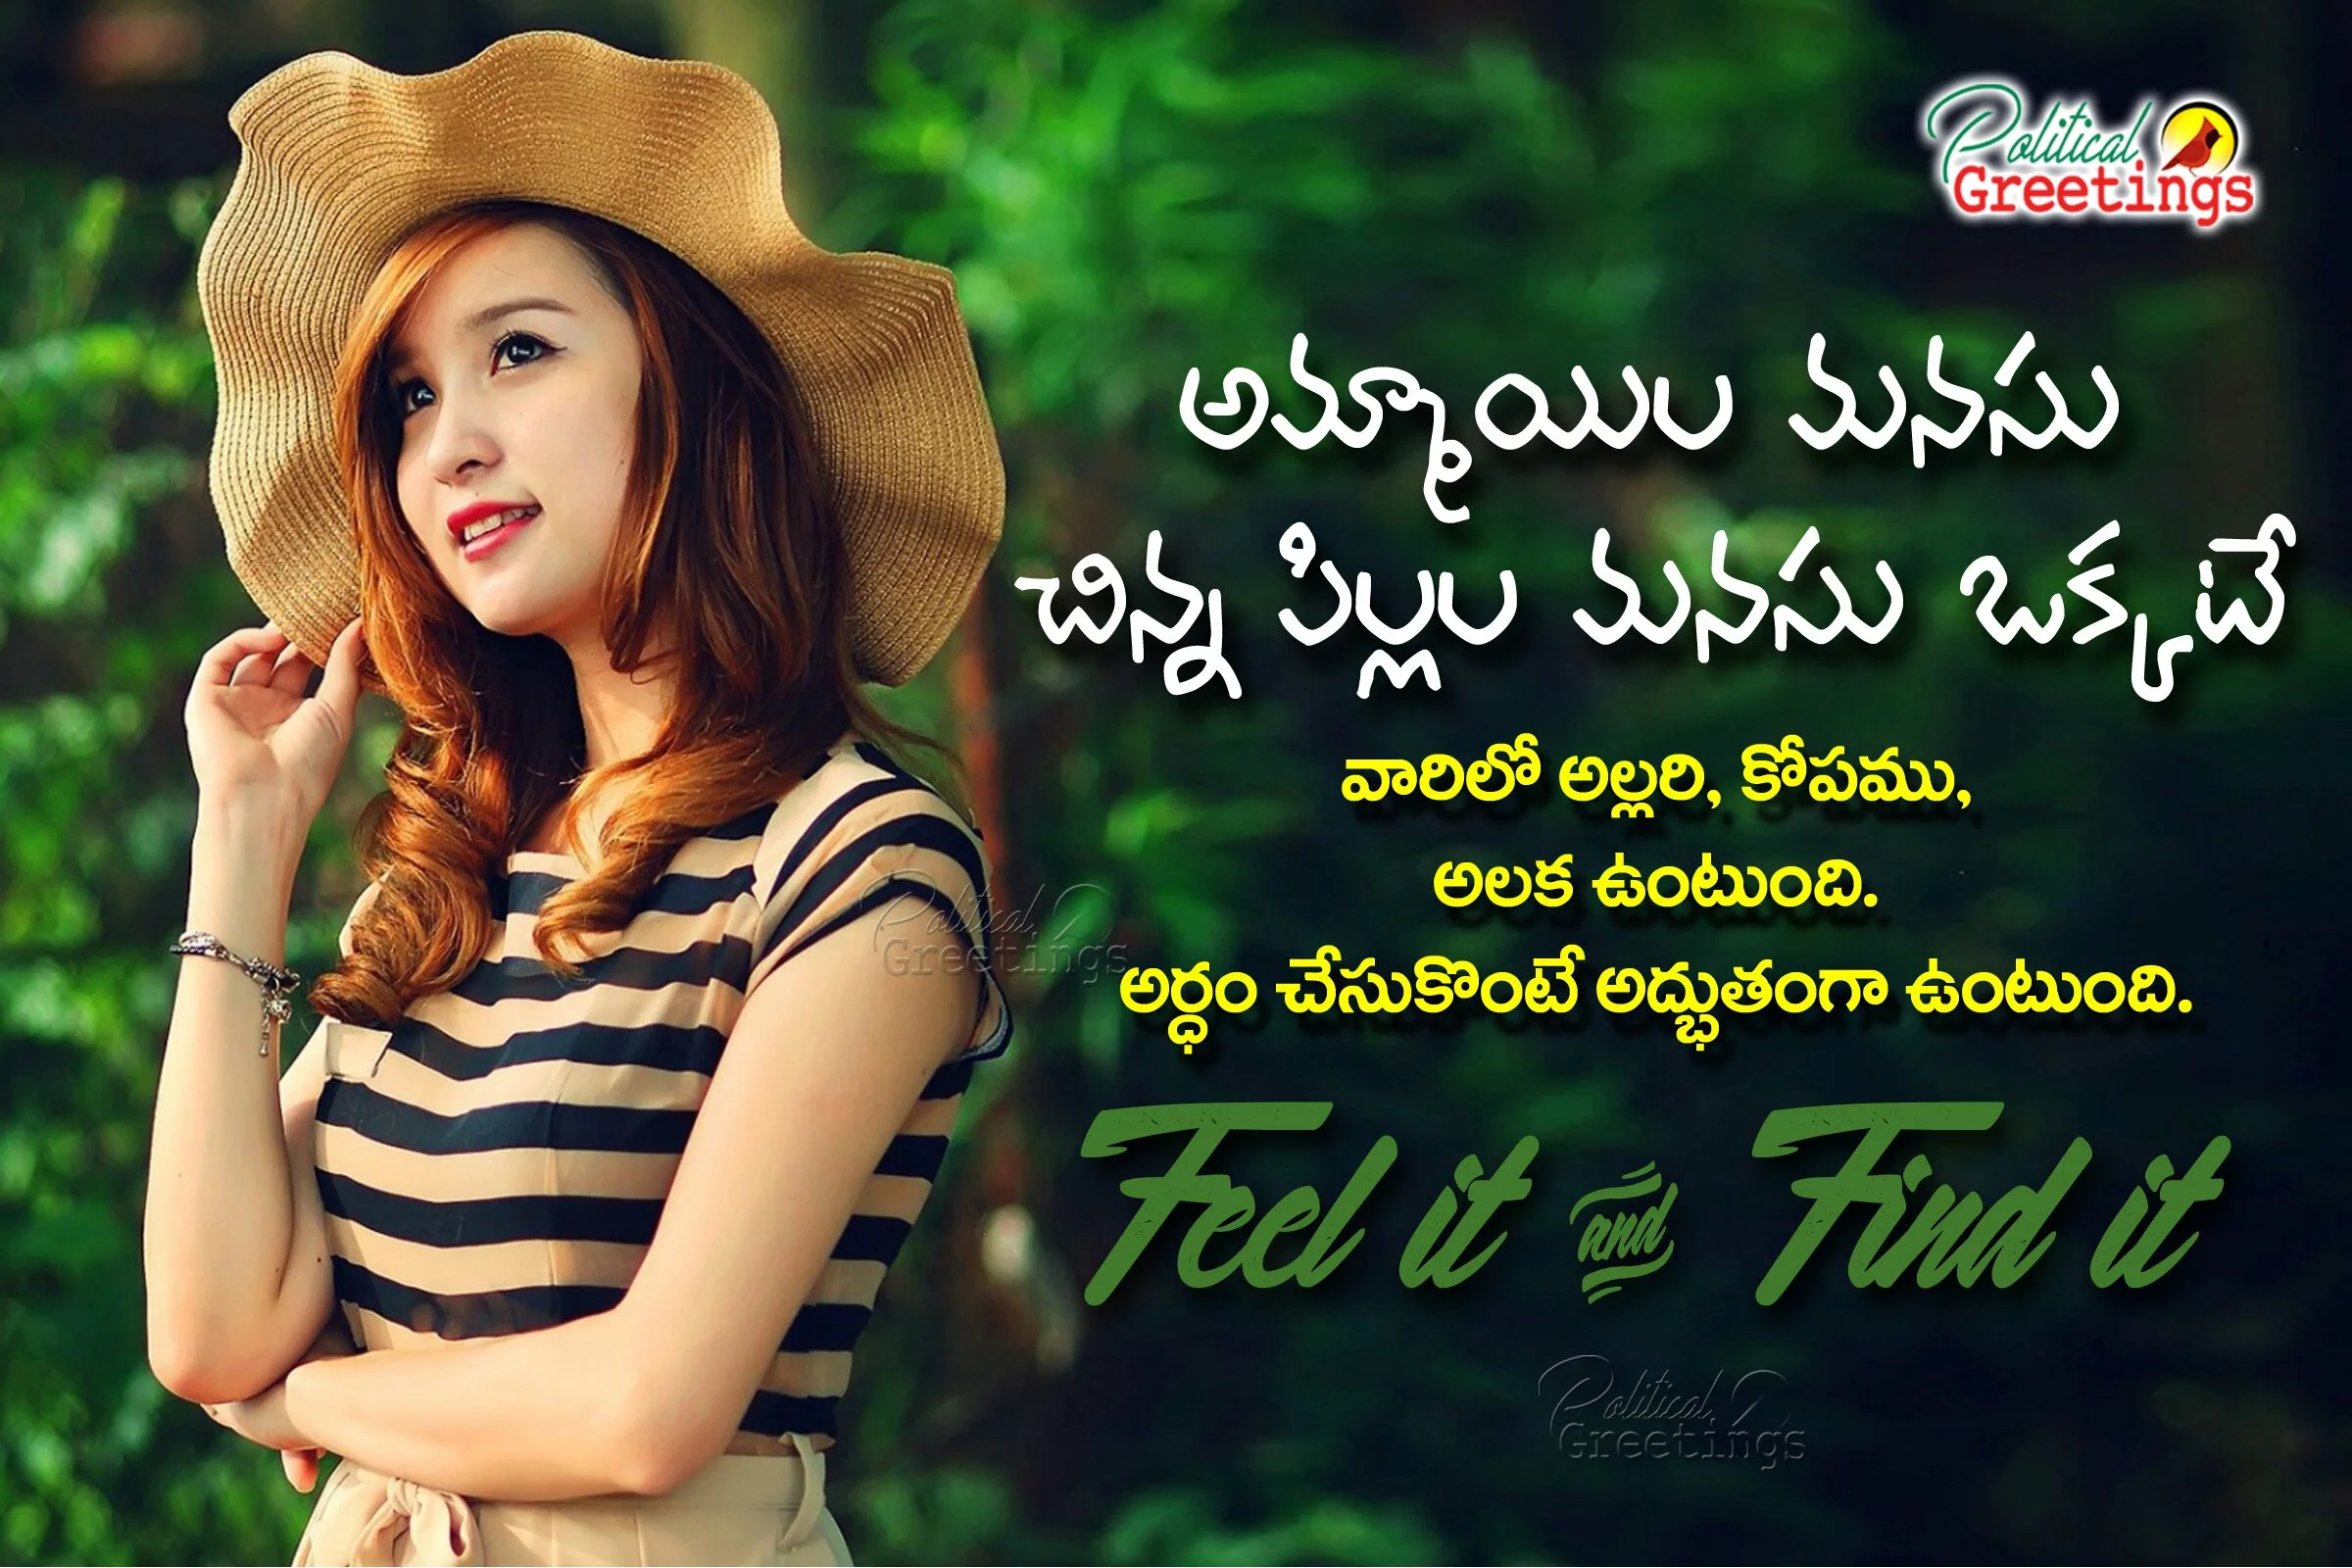 Understand feelings of the girl then life will be wonderfull telugu quotes and messages